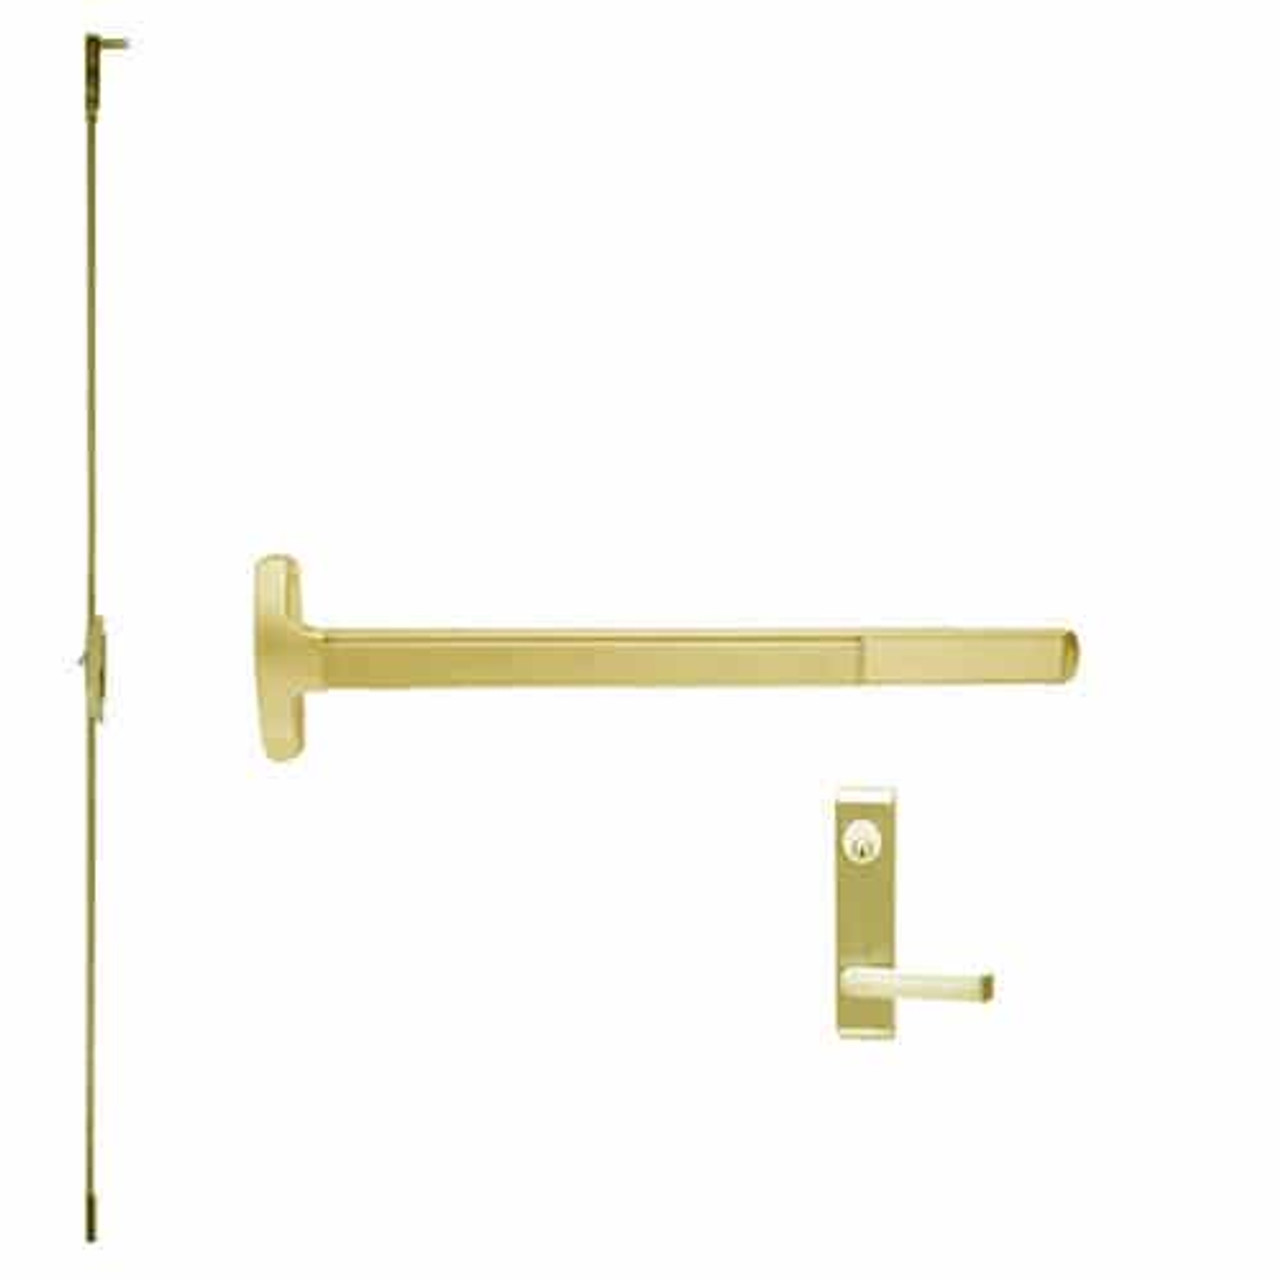 F-24-C-L-DANE-US3-2-LHR Falcon Exit Device in Polished Brass